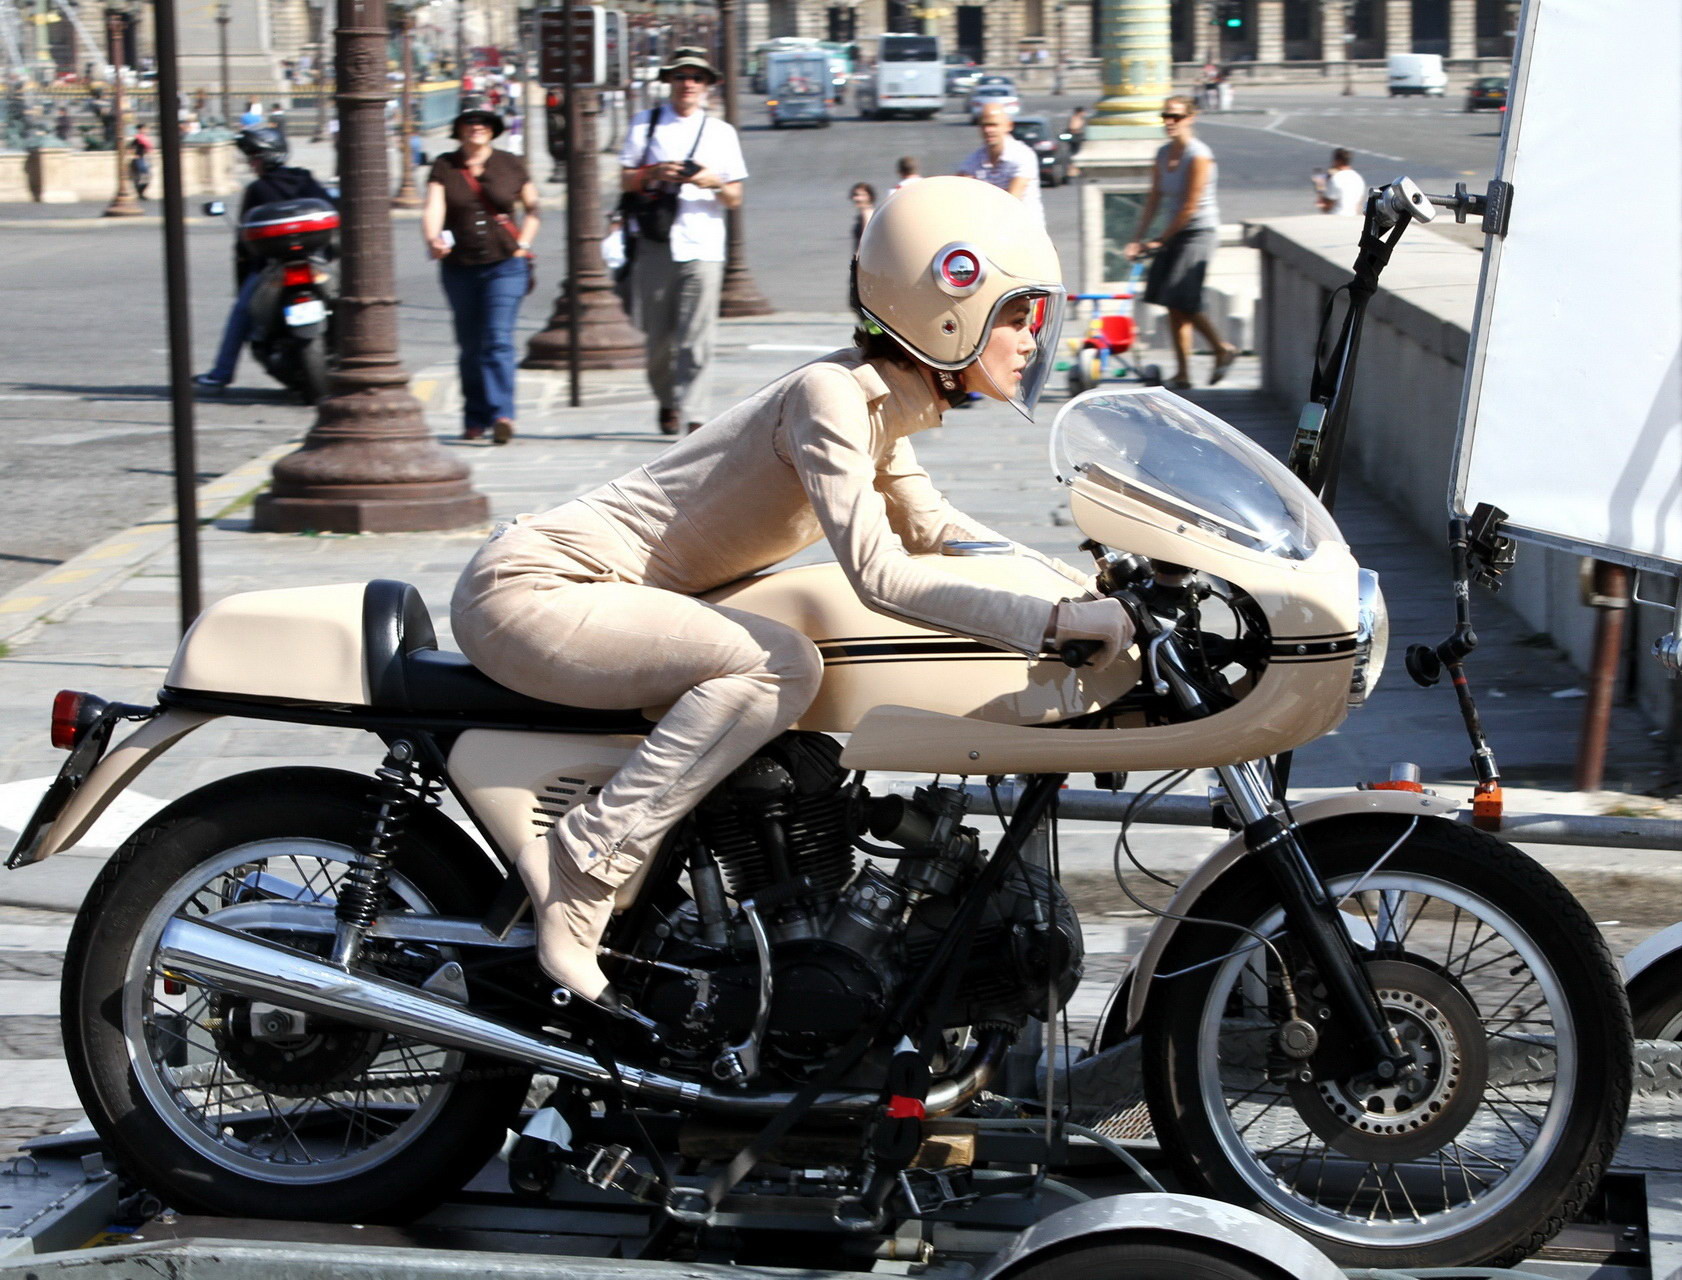 Keira Knightley in tight retro motorcycle suit shooting a commercial in Paris #75334787